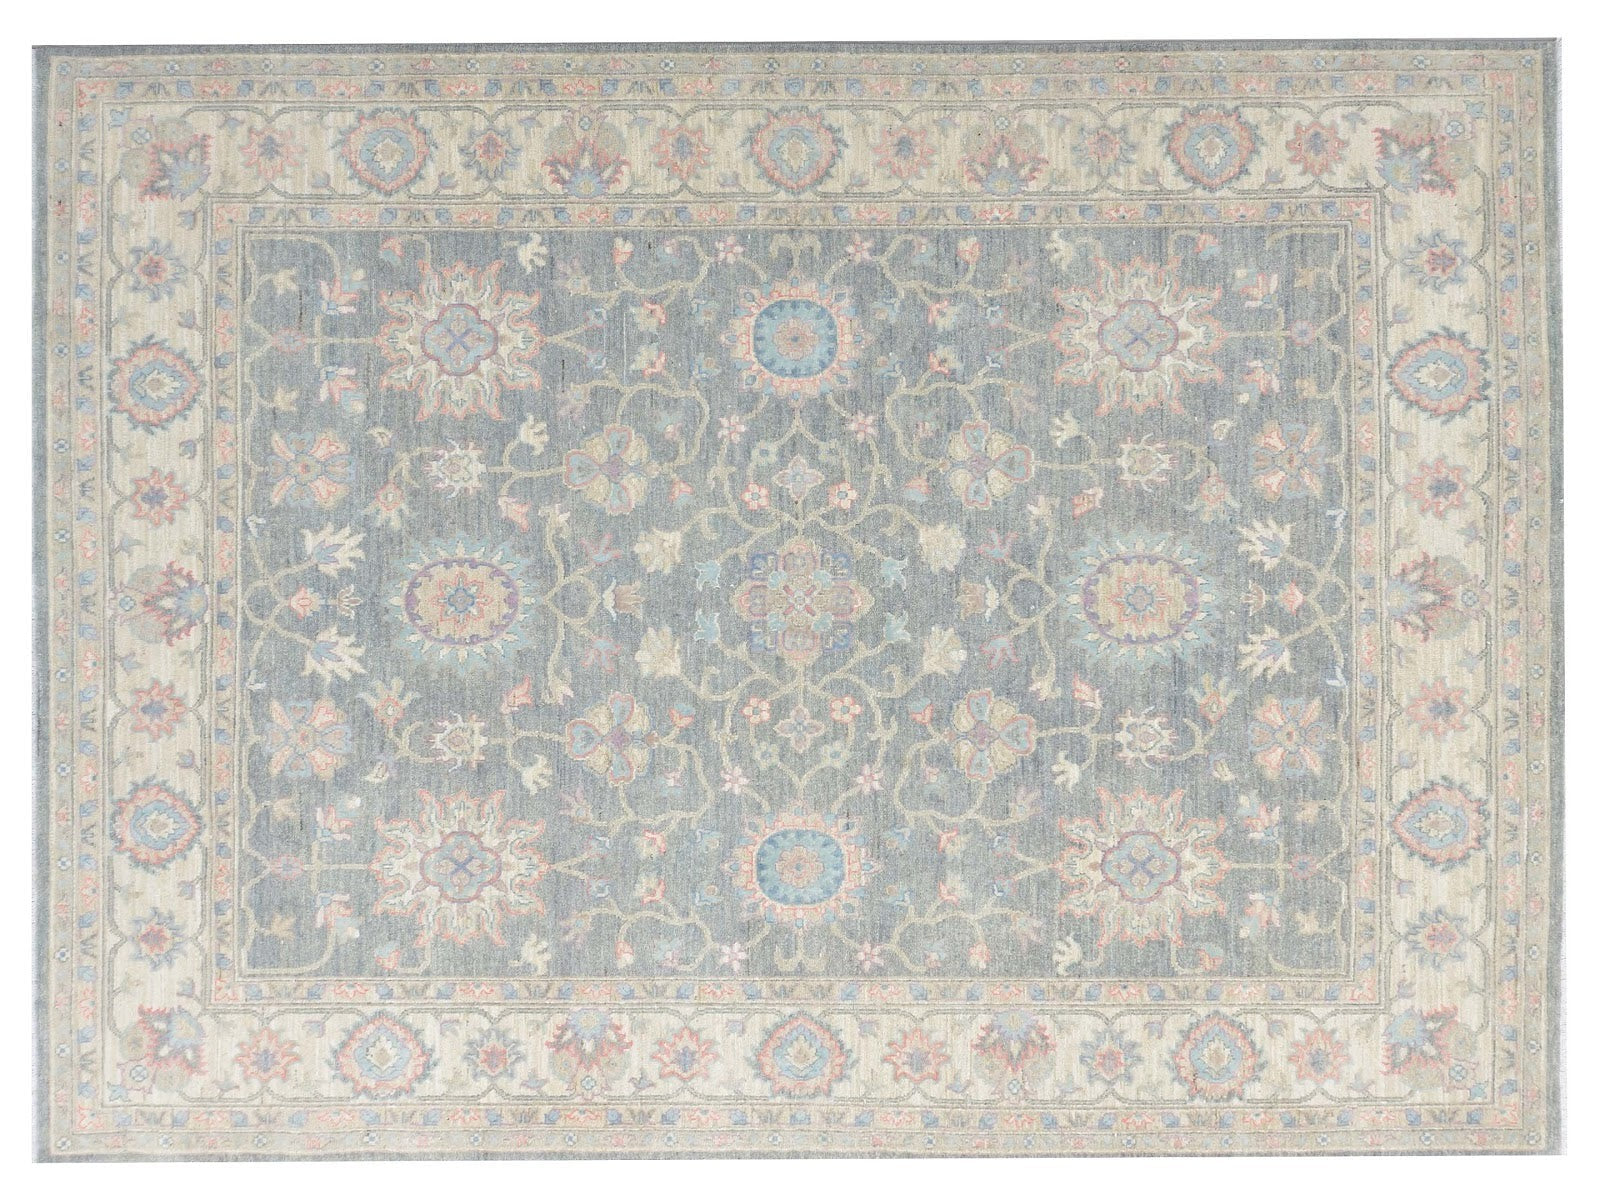 8x10 hand-knotted Ziegler wool rug in a transitional design featuring neutral tones, floral patterns, and gray-blue-purple accents